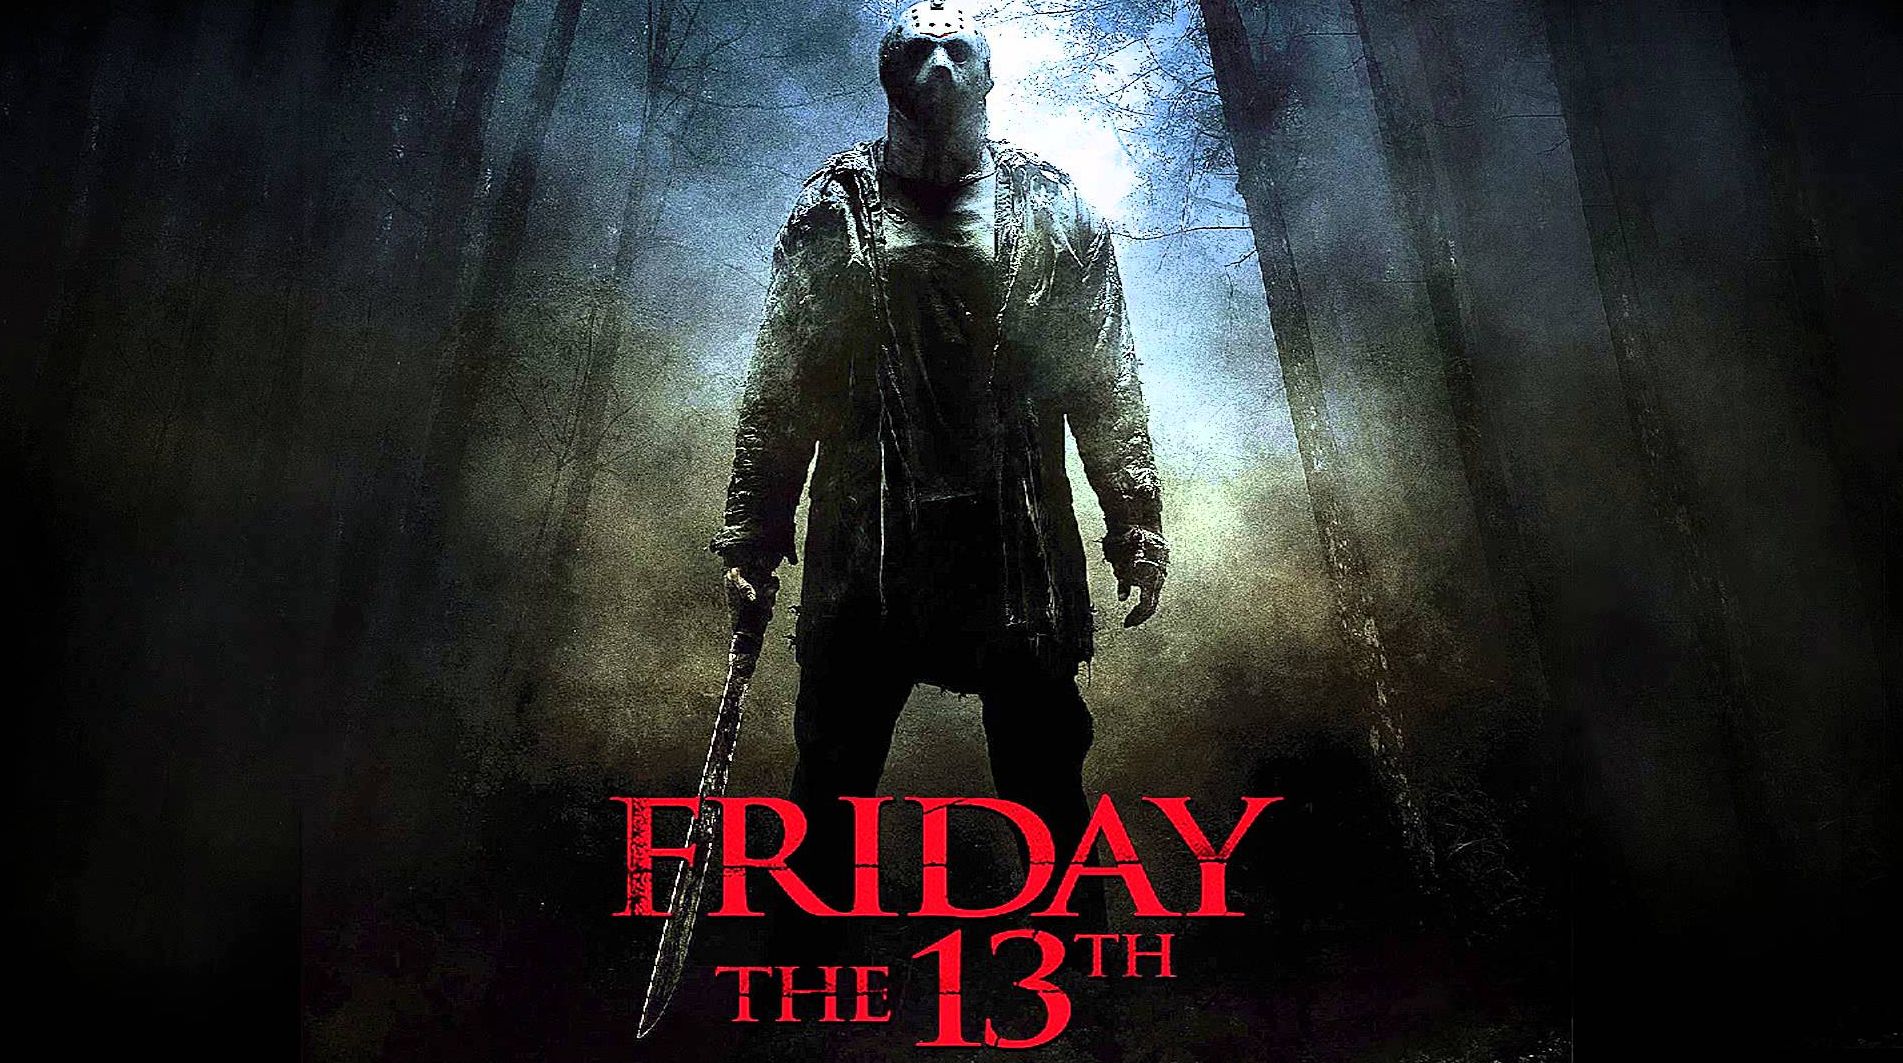 Friday the 13th almost came to CW